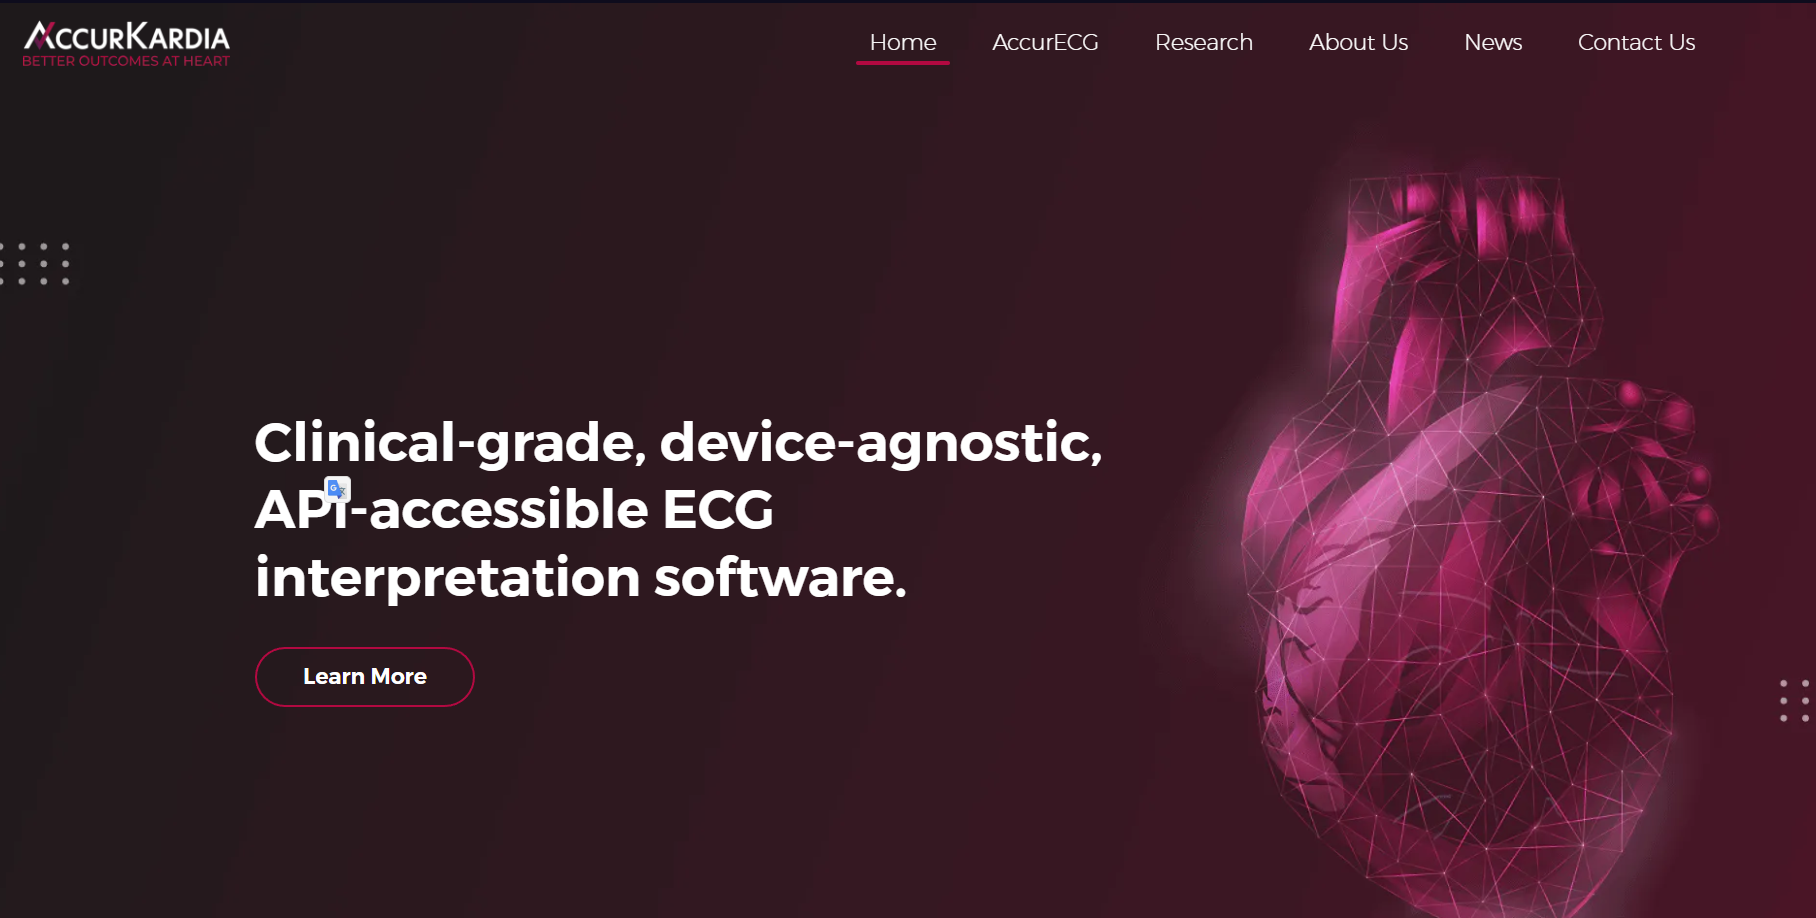 AccurKardia is the groundbreaking startup revolutionizing remote cardiac care with its automated clinical-grade ECG interpretation software.